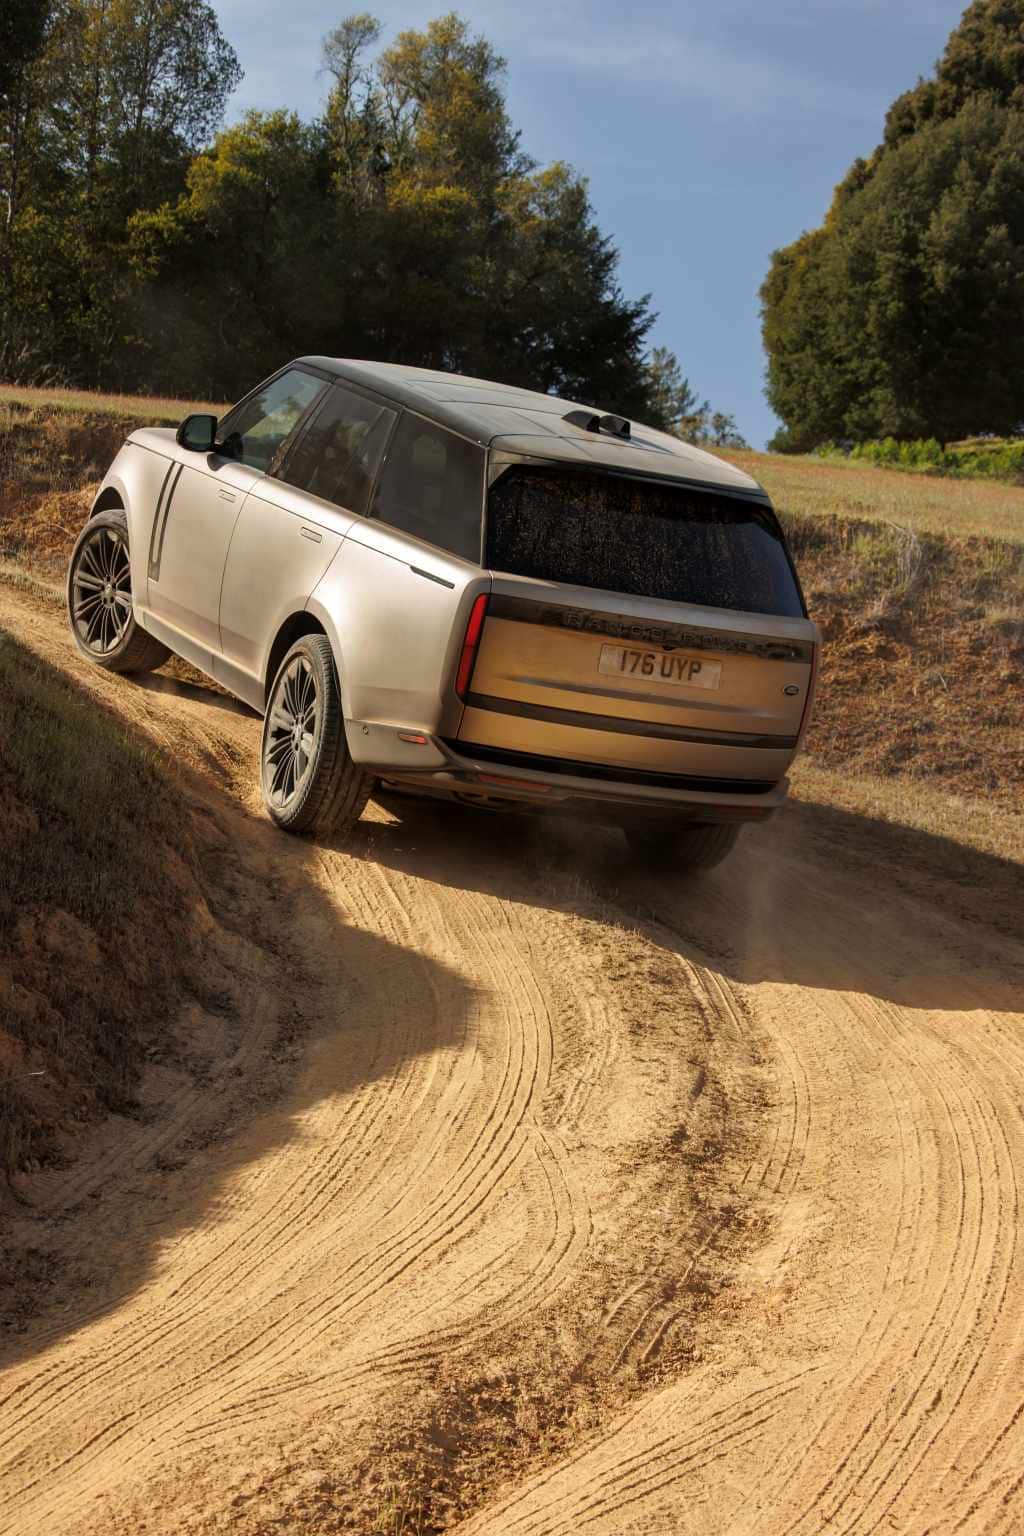 The Range Rover has managed to be relatively immune to market forces, partly due to the patronage it receives from celebrities and partly due to the fact that it’s always been a terrific product